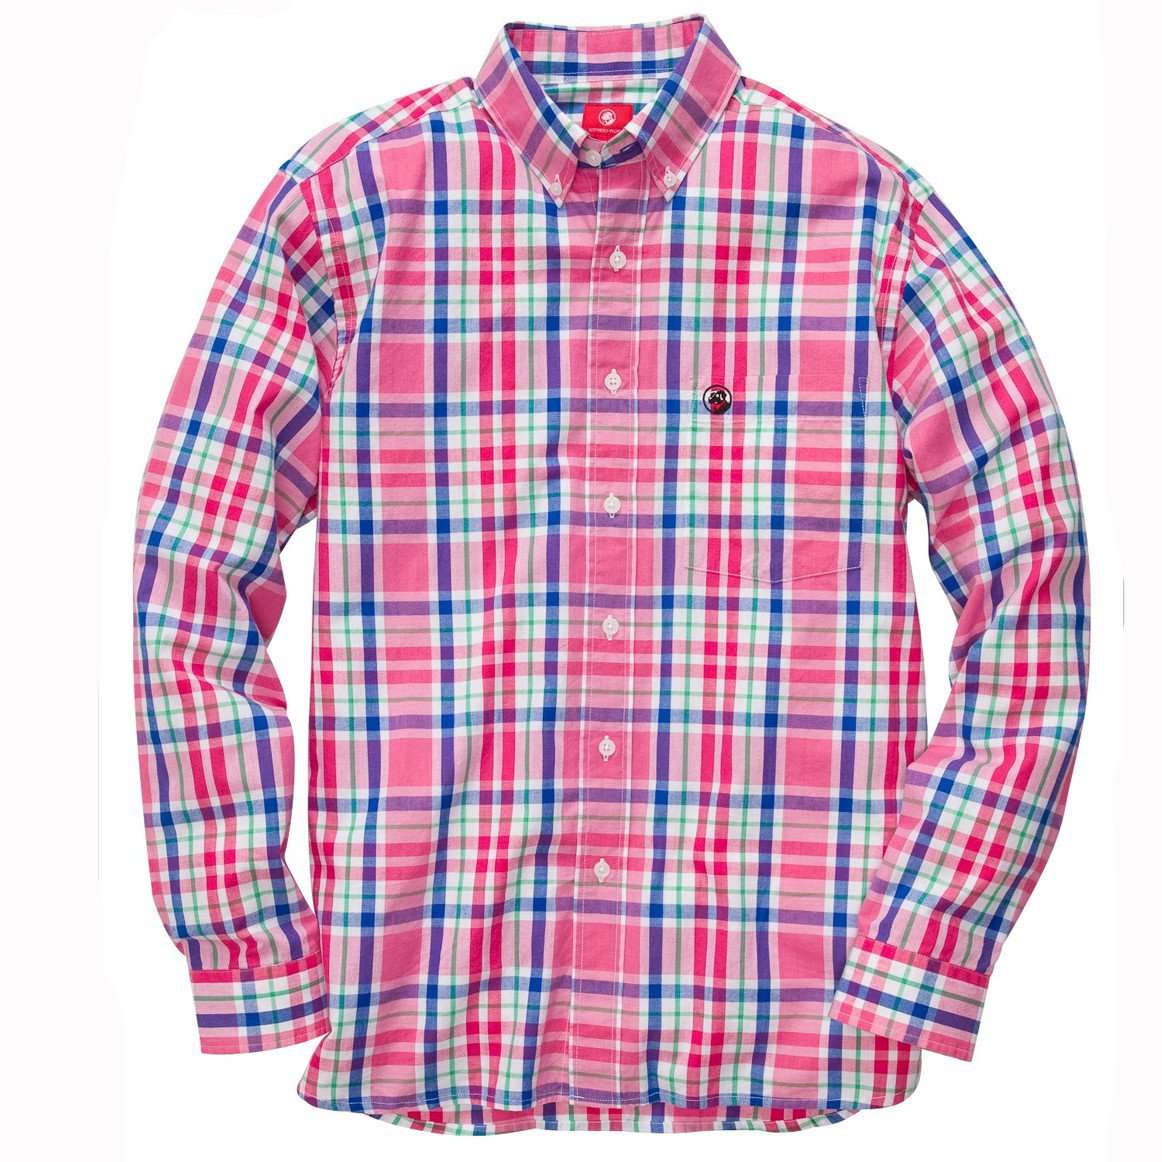 Rich Red Southern Shirt by Southern Proper - Country Club Prep